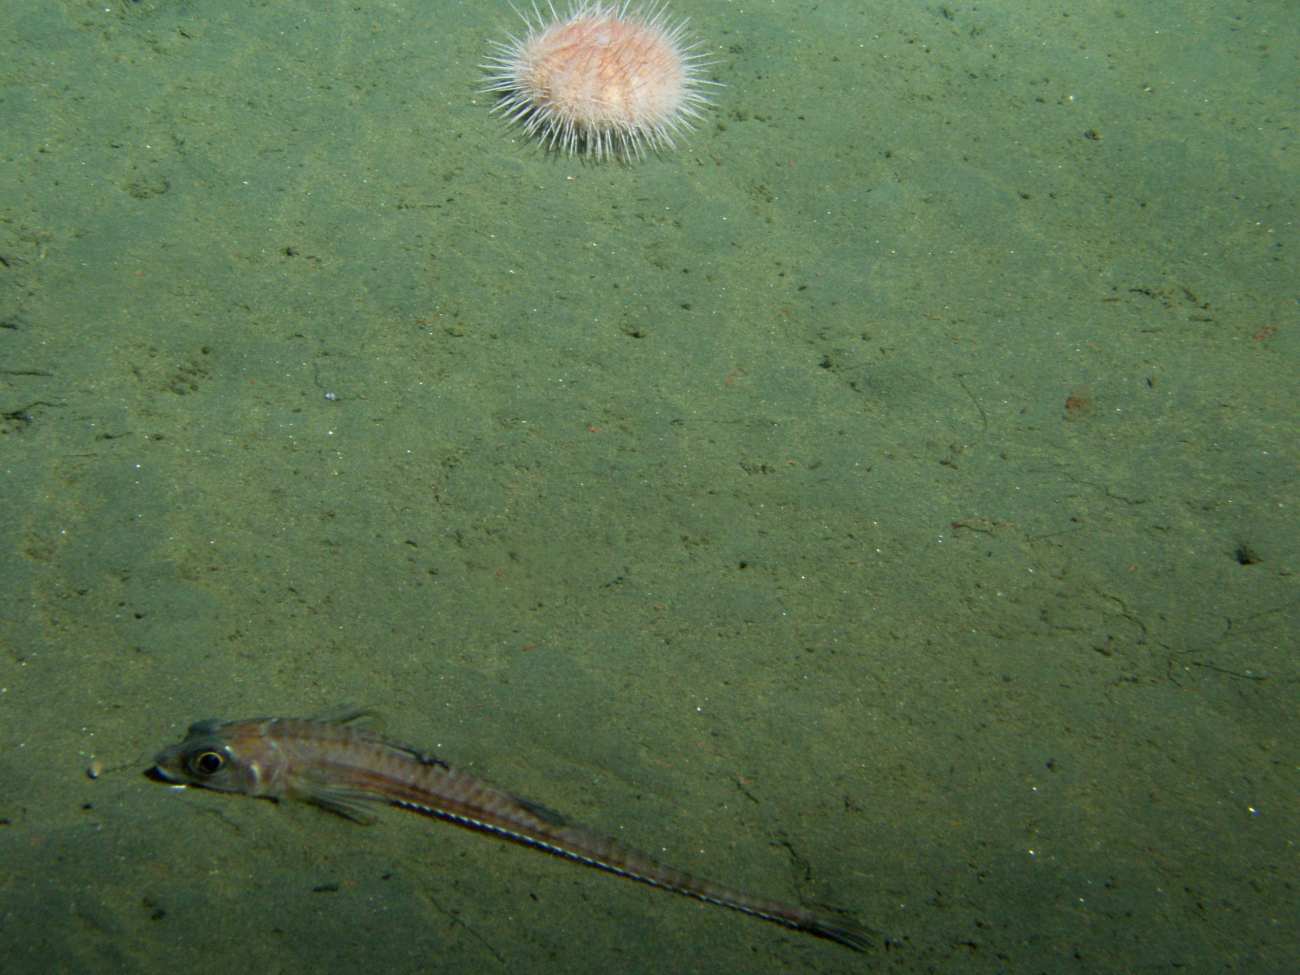 Poacher and urchin on soft sediment of the continental shelfat 150 meters depth